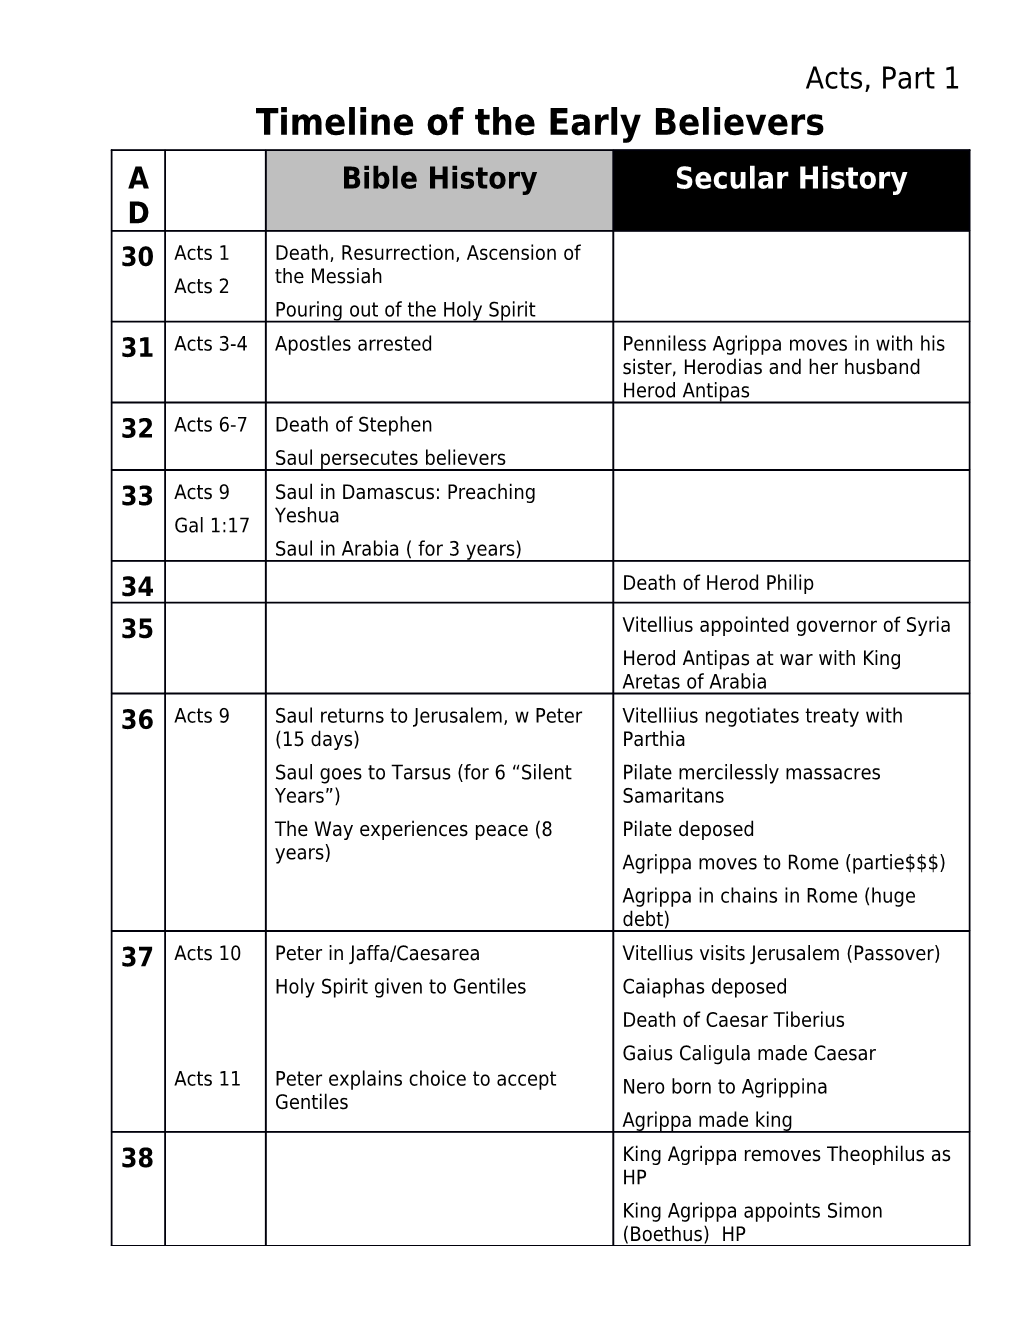 Timeline of the Early Believers